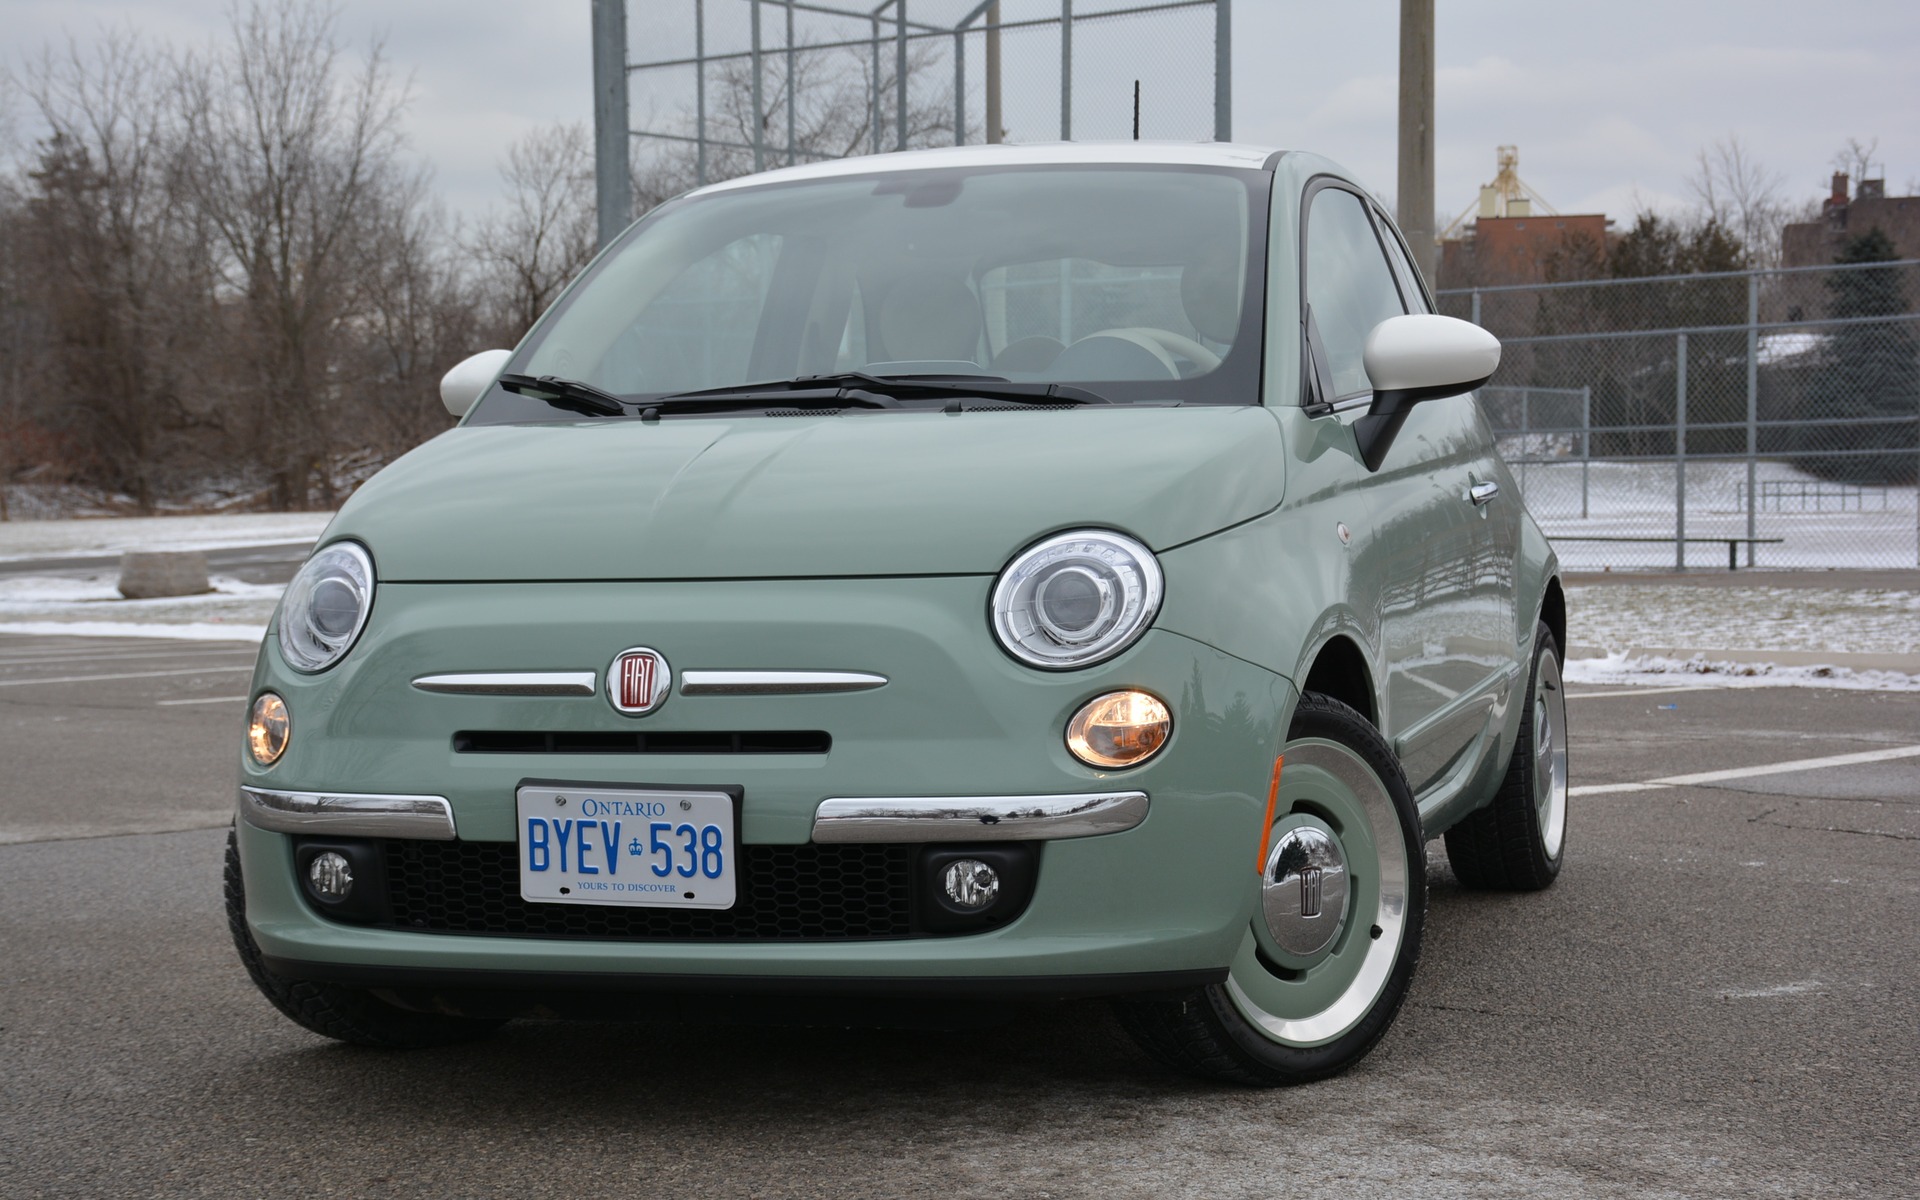 Fiat opens up vintage-style 1957 Edition to 500 Cabrio - Autoblog